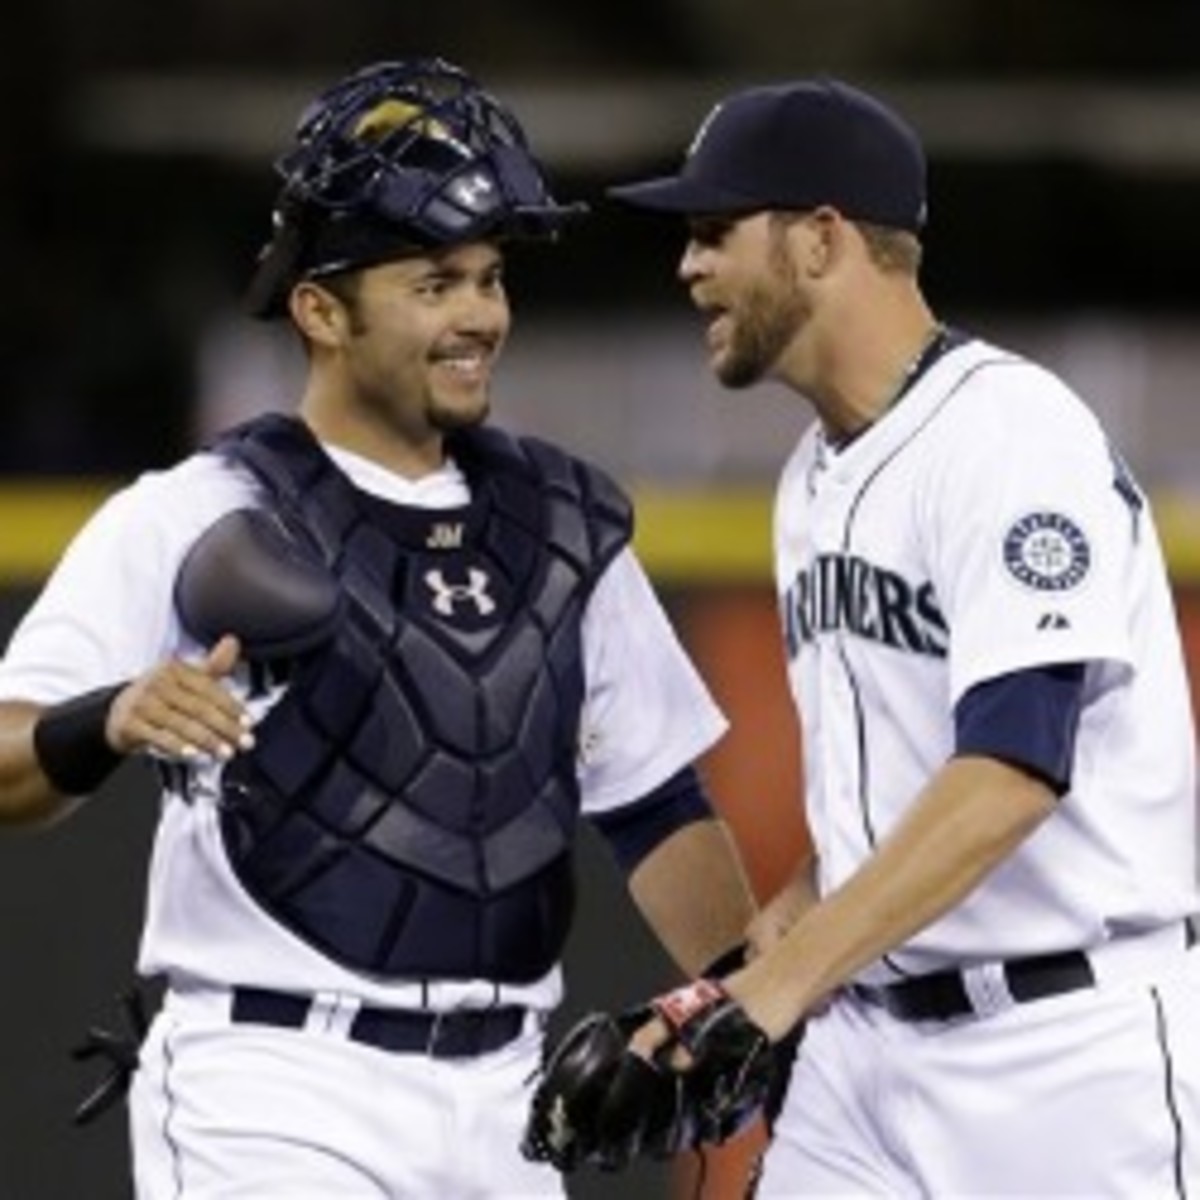 The Seattle Mariners are one of four MLB teams that did not have a single African-American player on their opening day roster. (AP Photo/Elaine Thompson)